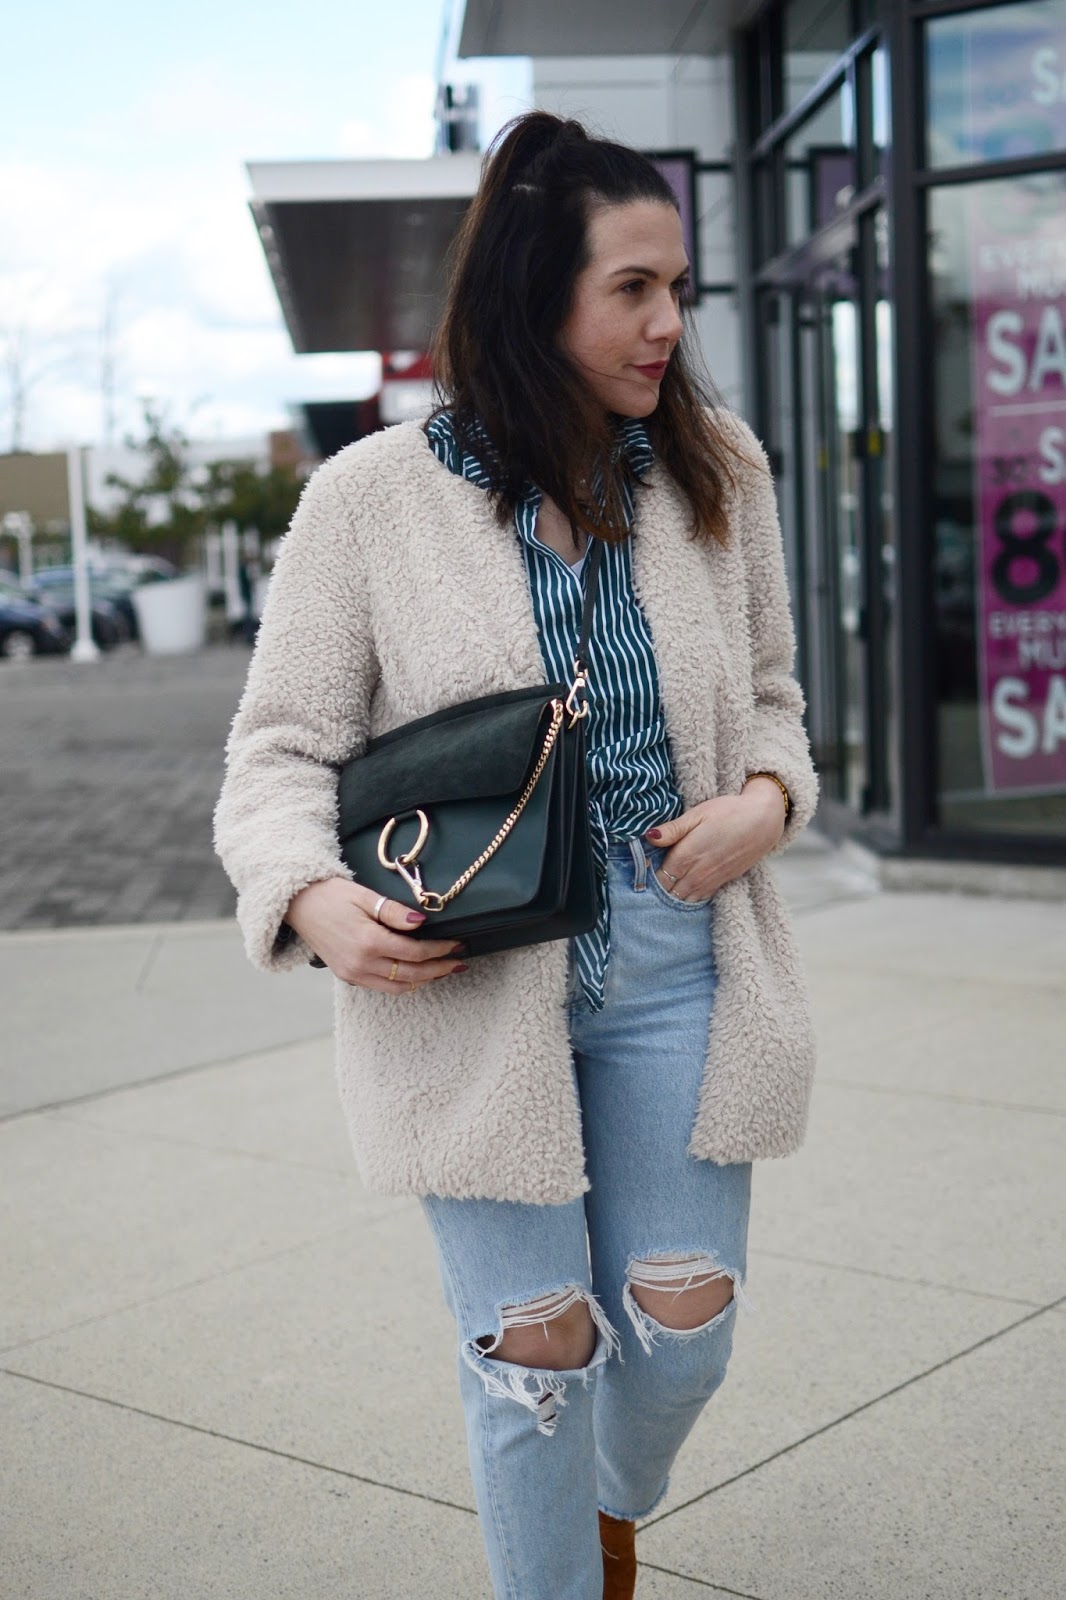 Dynamite striped tie blouse outfit levis wedgie jeans vancouver fashion blogger aleesha harris